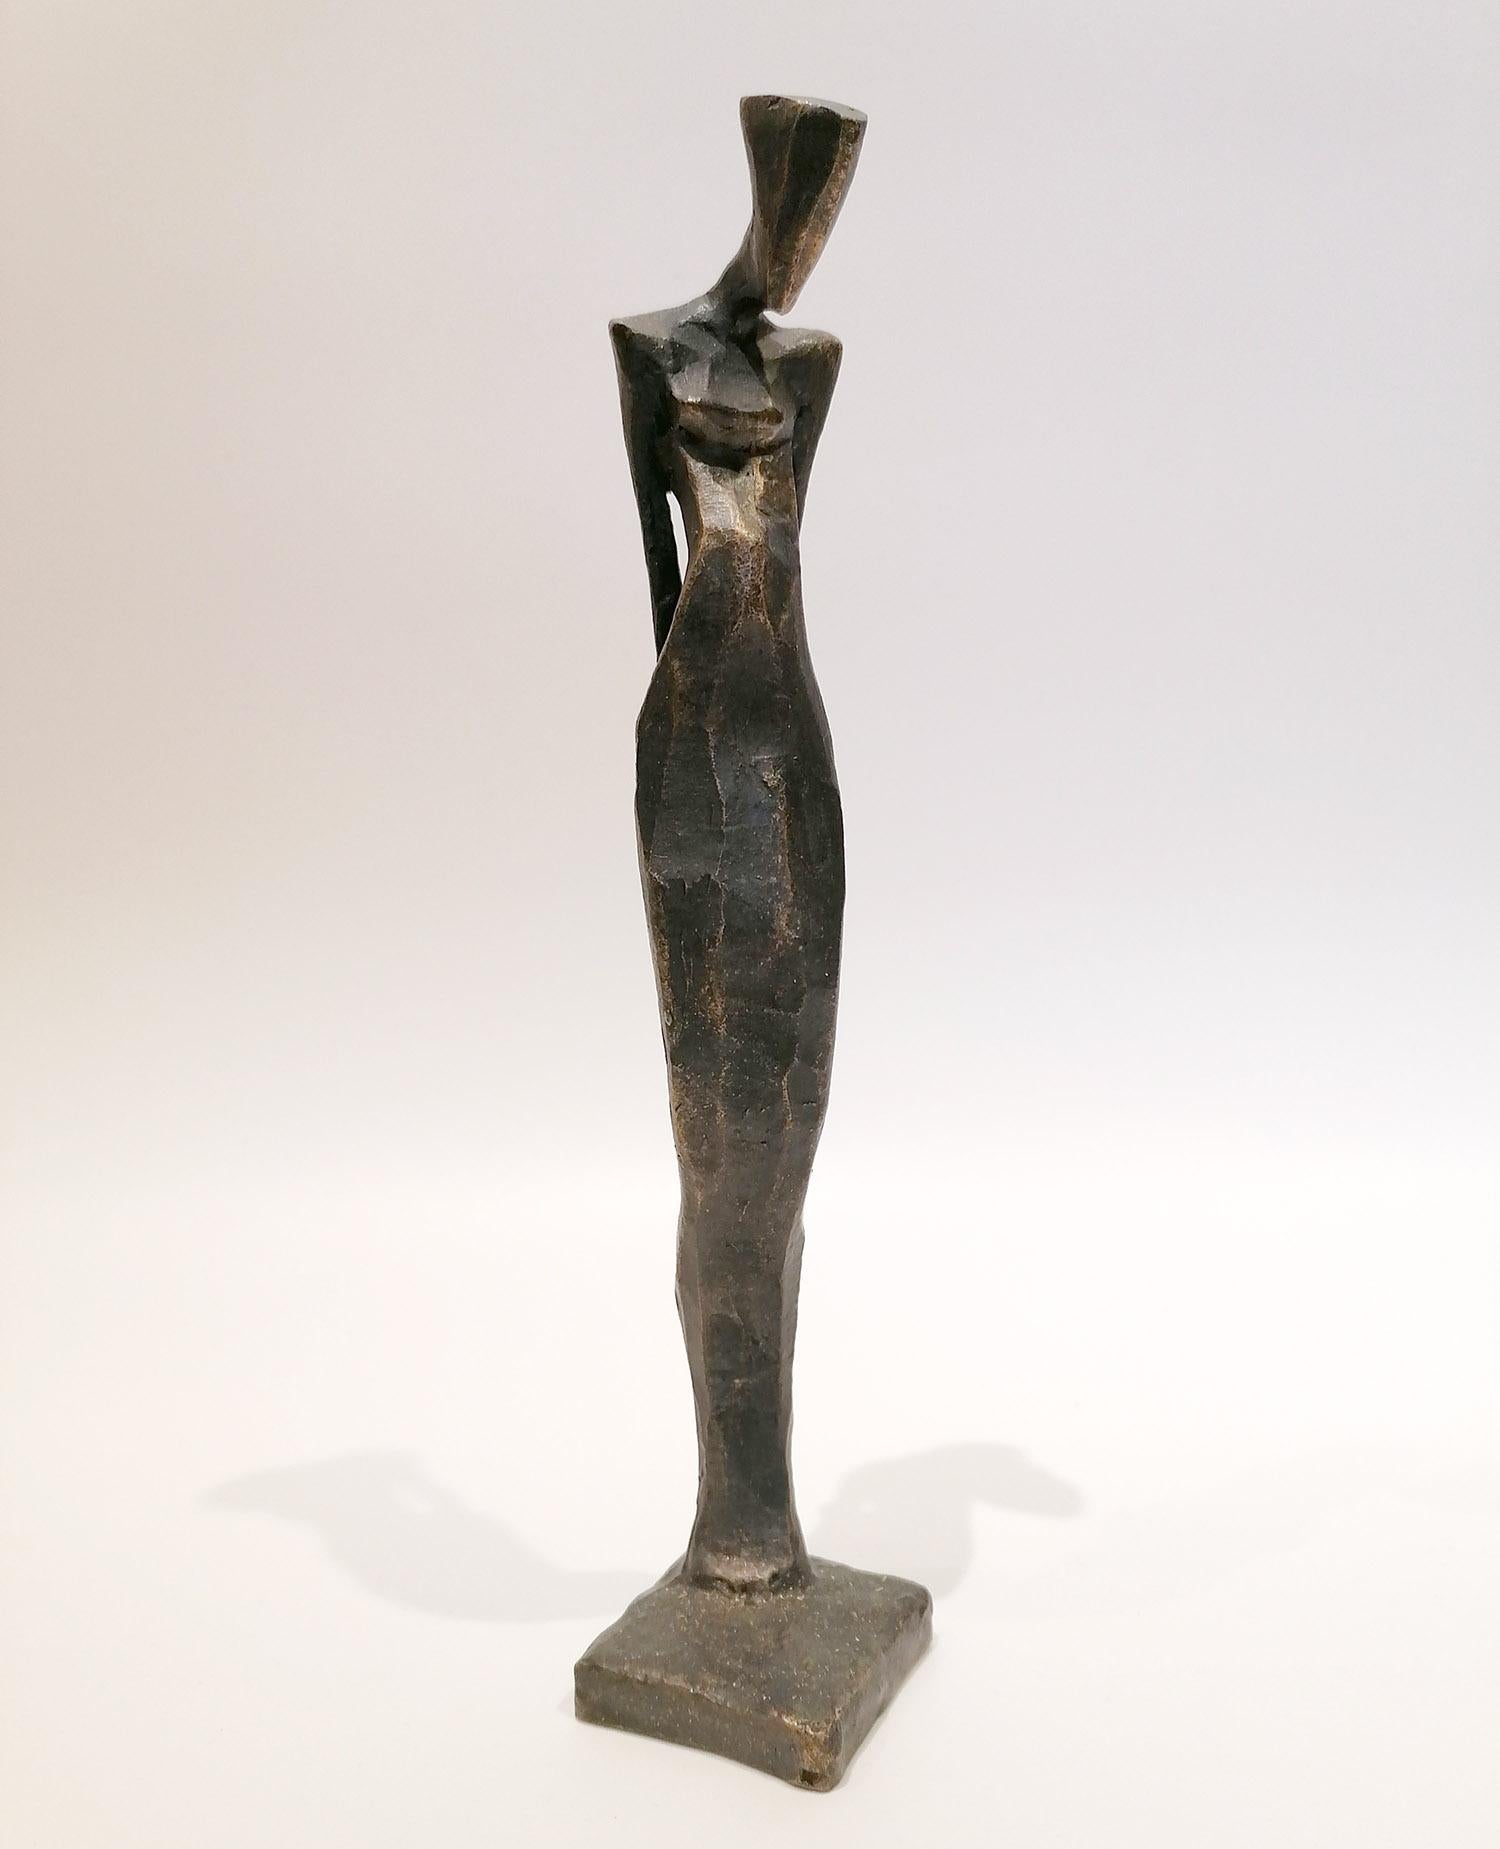 Annalies is a figurative bronze sculpture in a relaxed pose by Nando Kallweit.

Modelled on modern youthful postures but with a nod to the importance of heritage through the stylised Egyptian-influenced head. A lovely piece on its own or with a